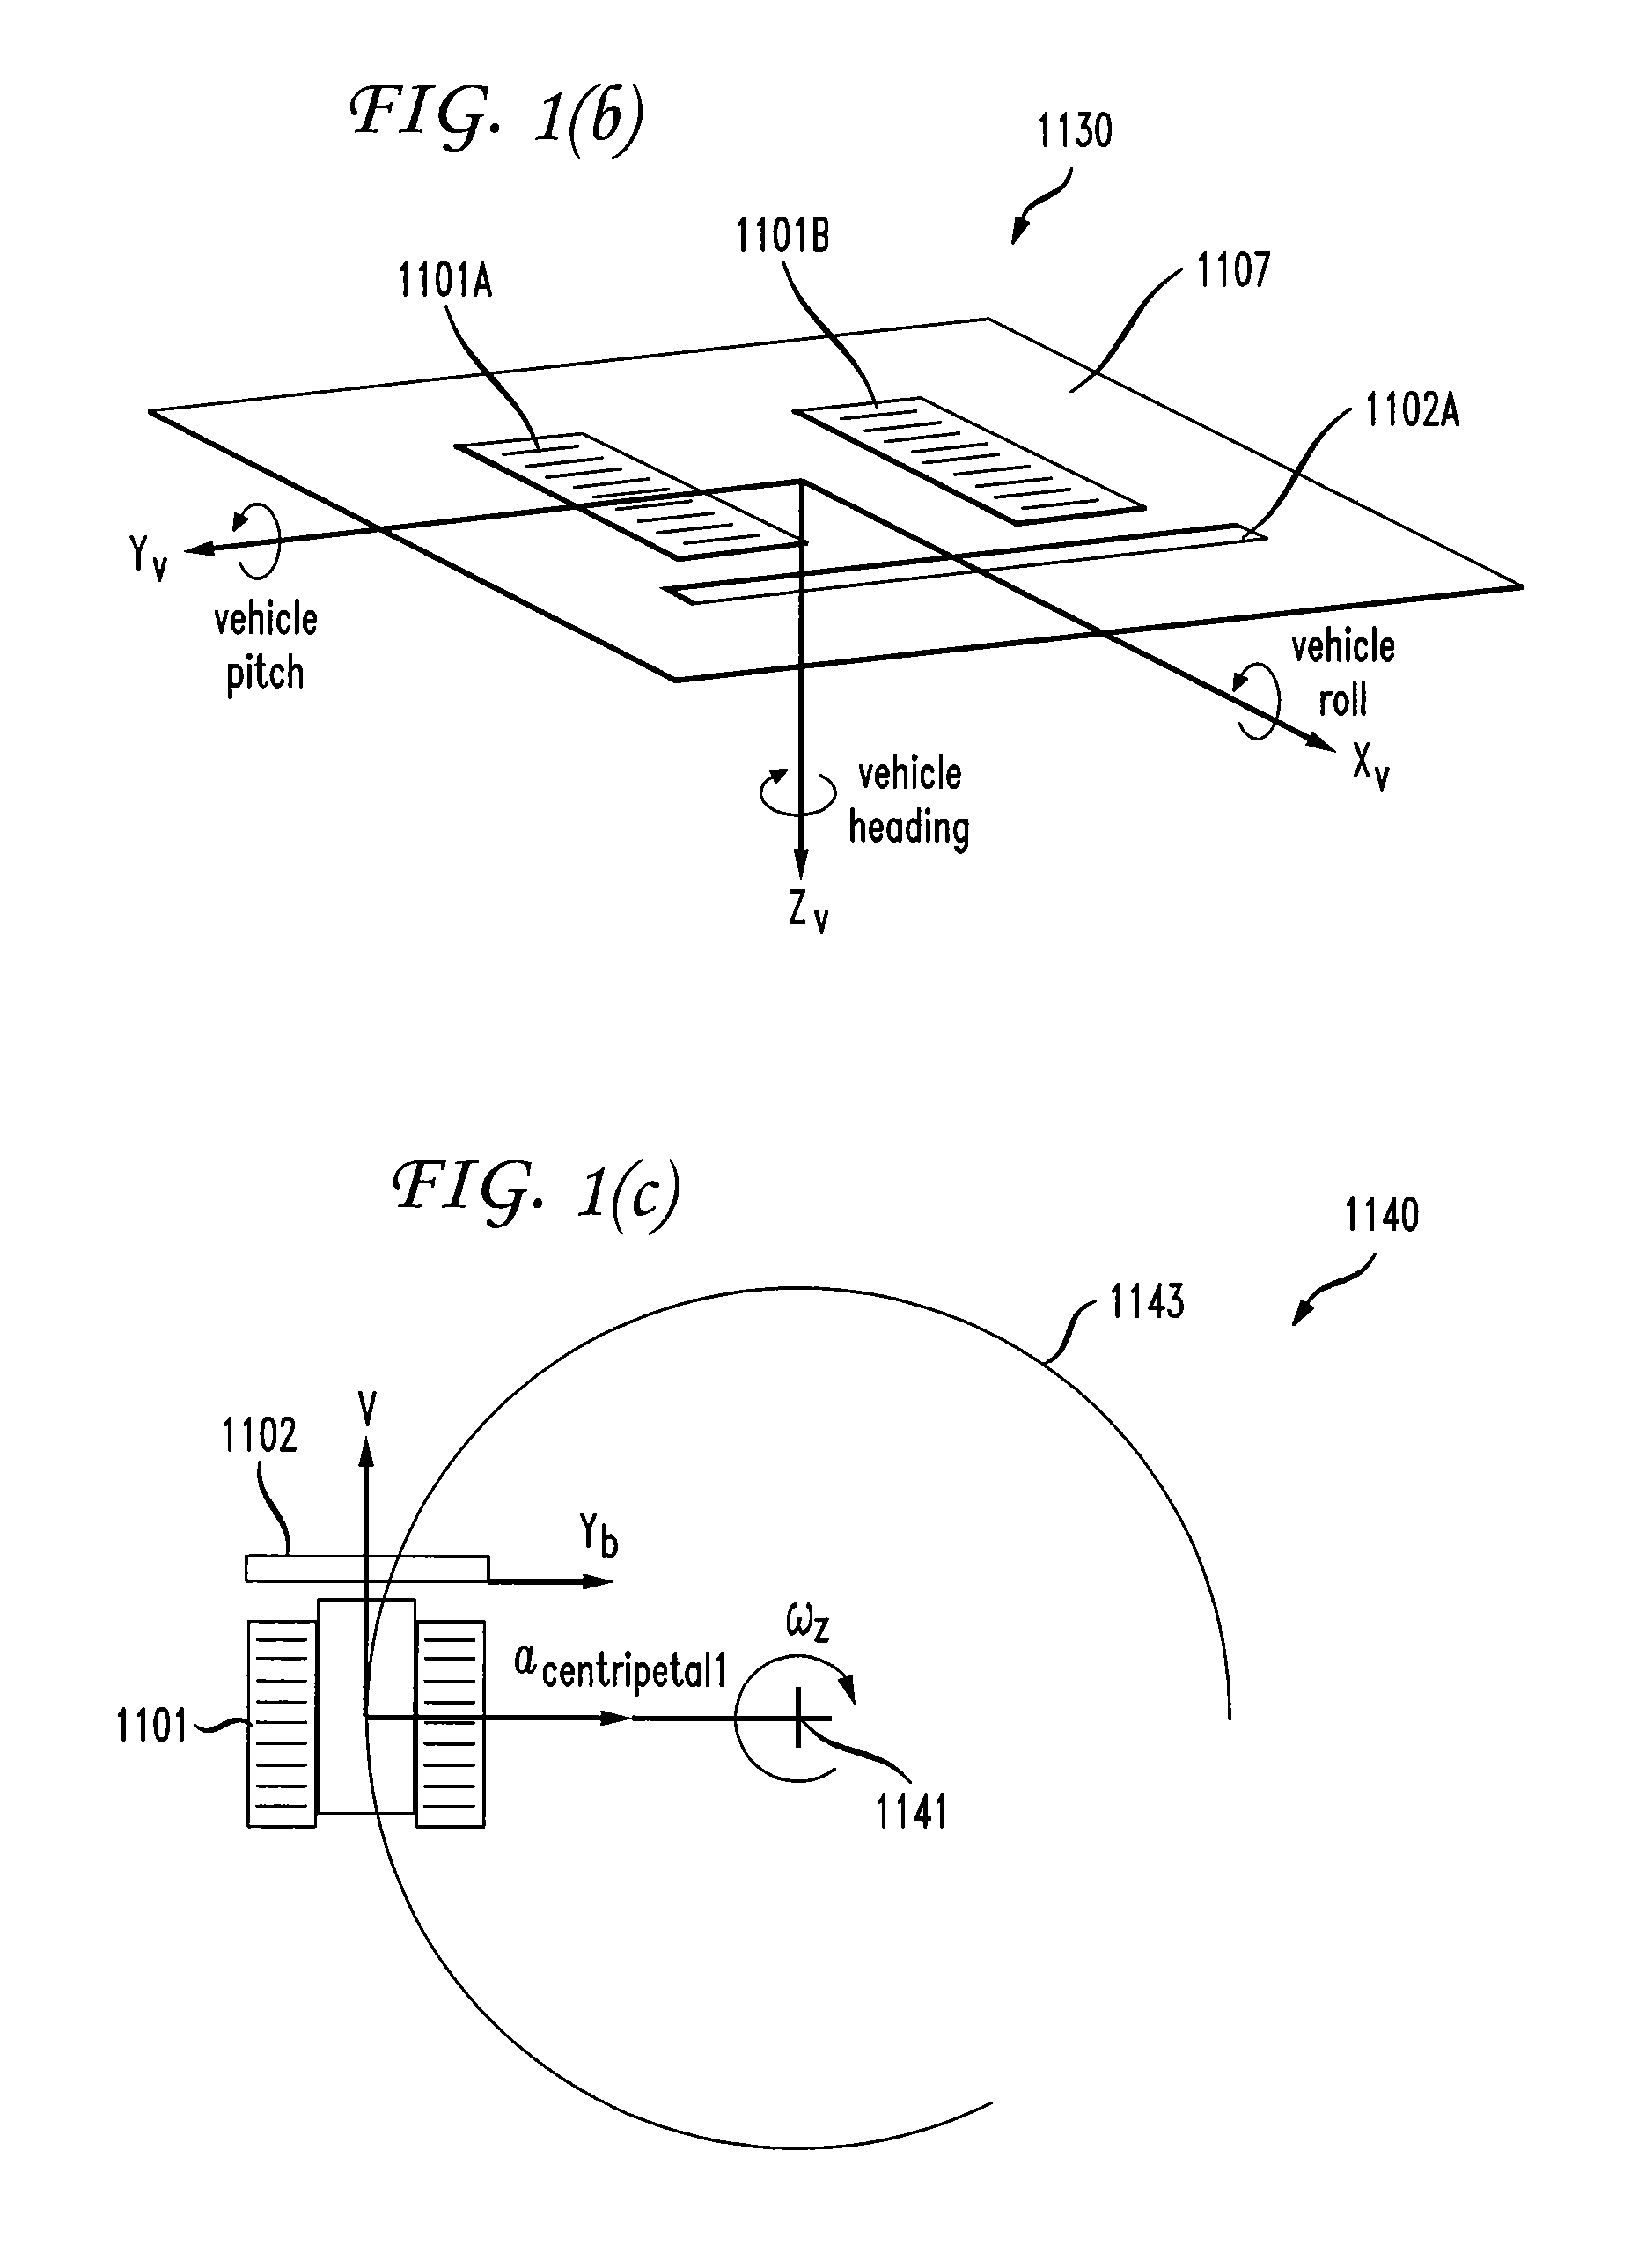 Automatic blade control system with integrated global navigation satellite system and inertial sensors